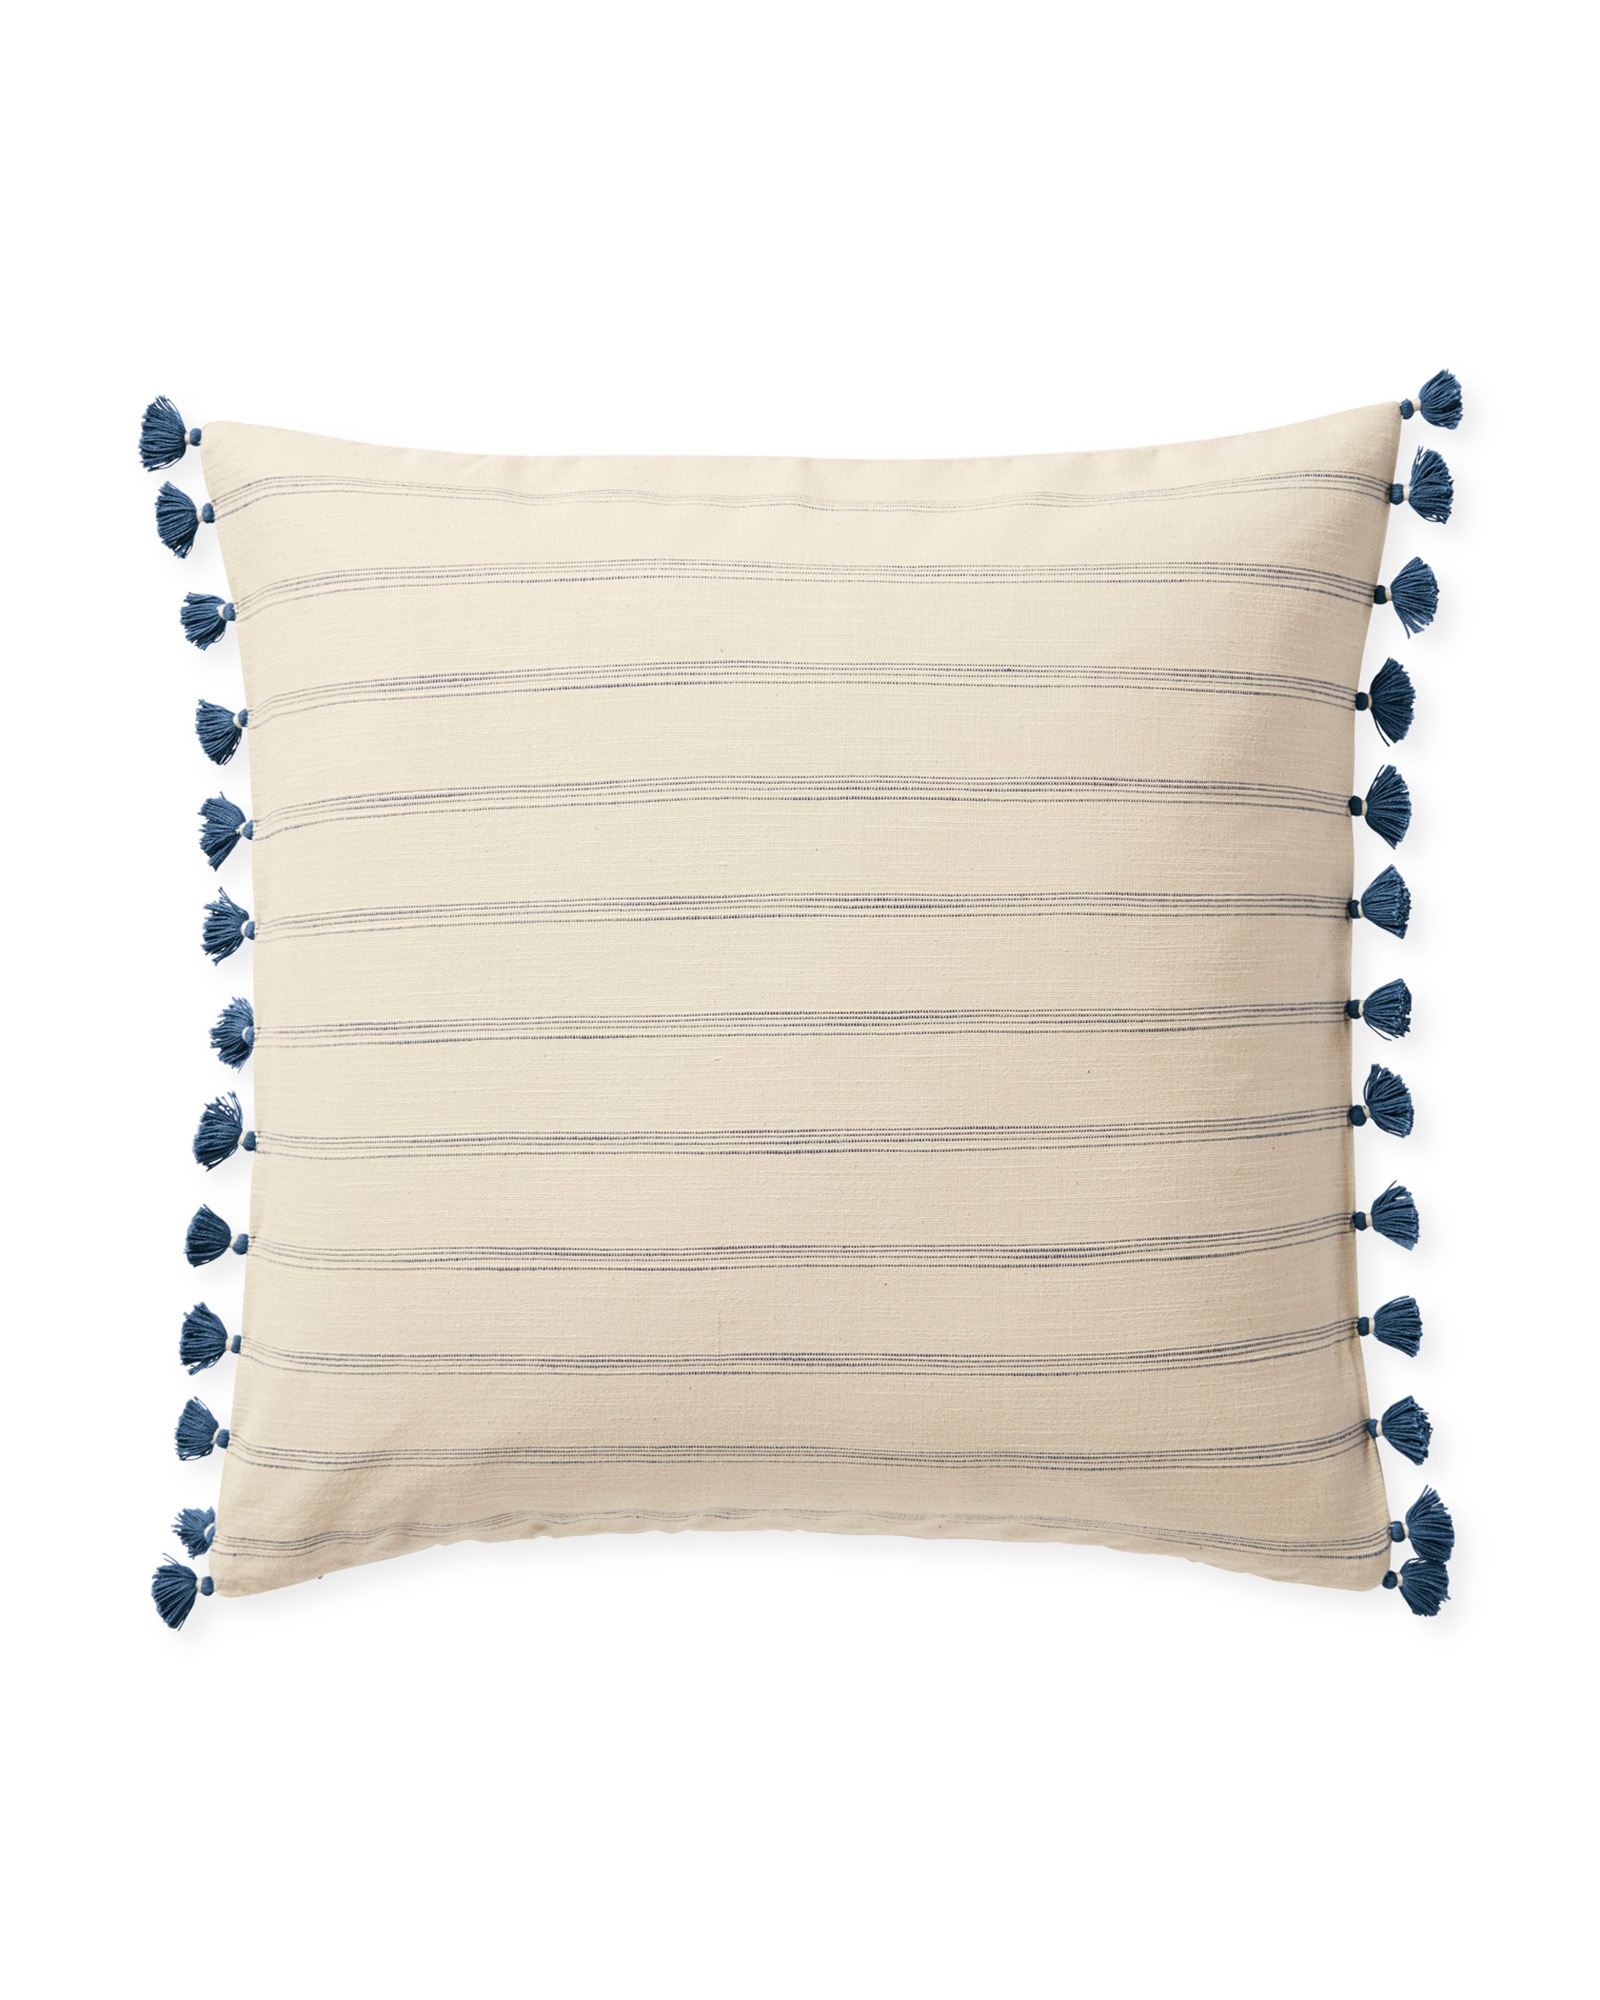 Alsworth Pillow Cover - Washed Indigo - Image 0